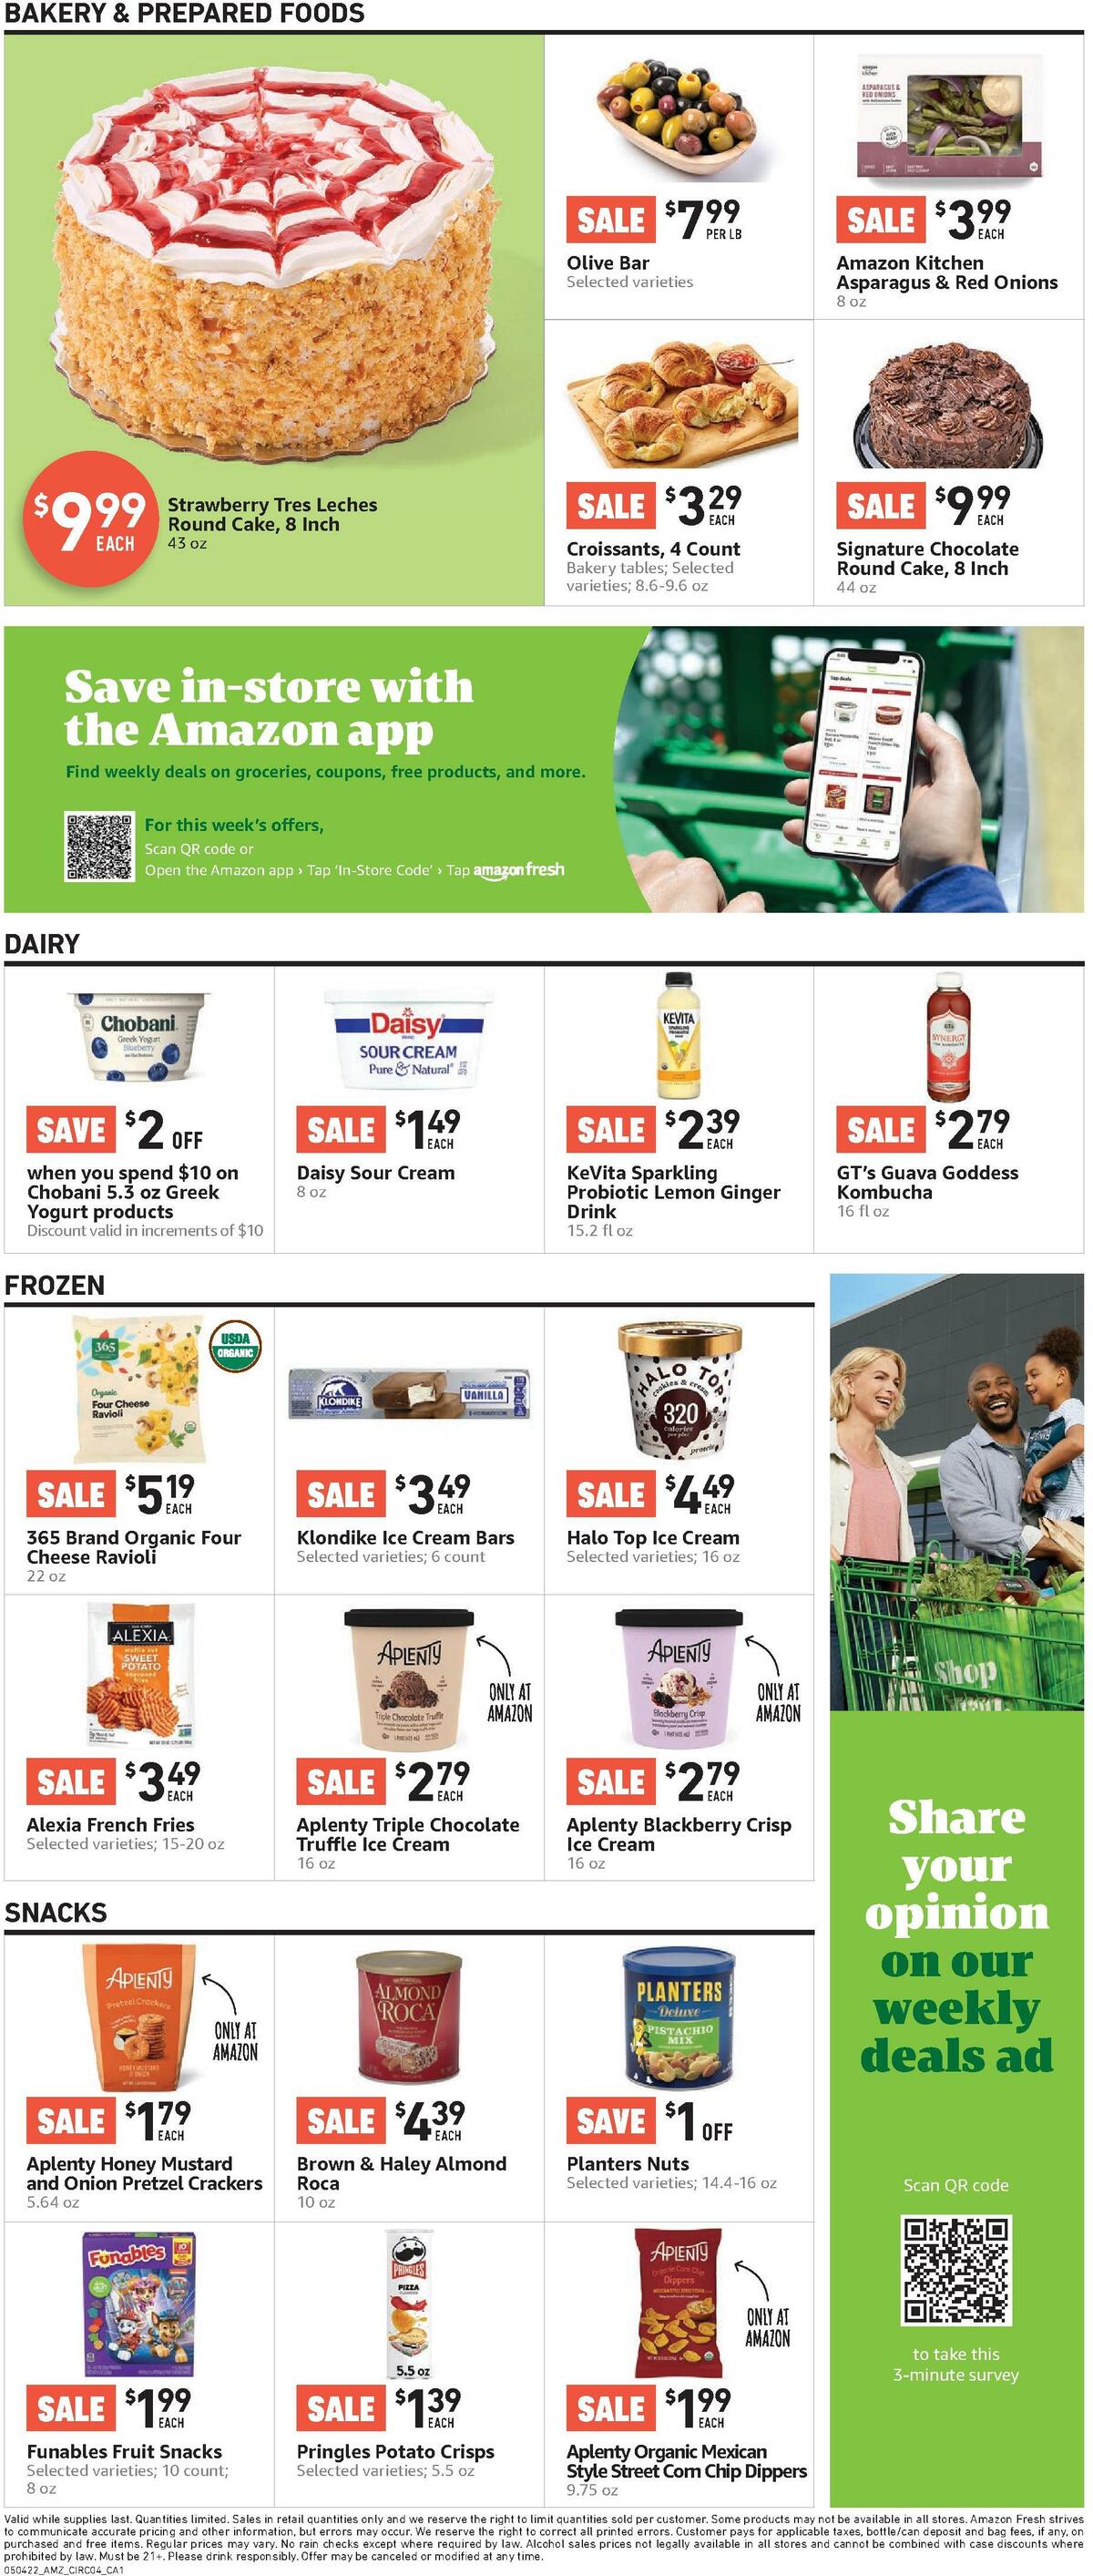 Amazon Fresh Weekly Ad from May 4